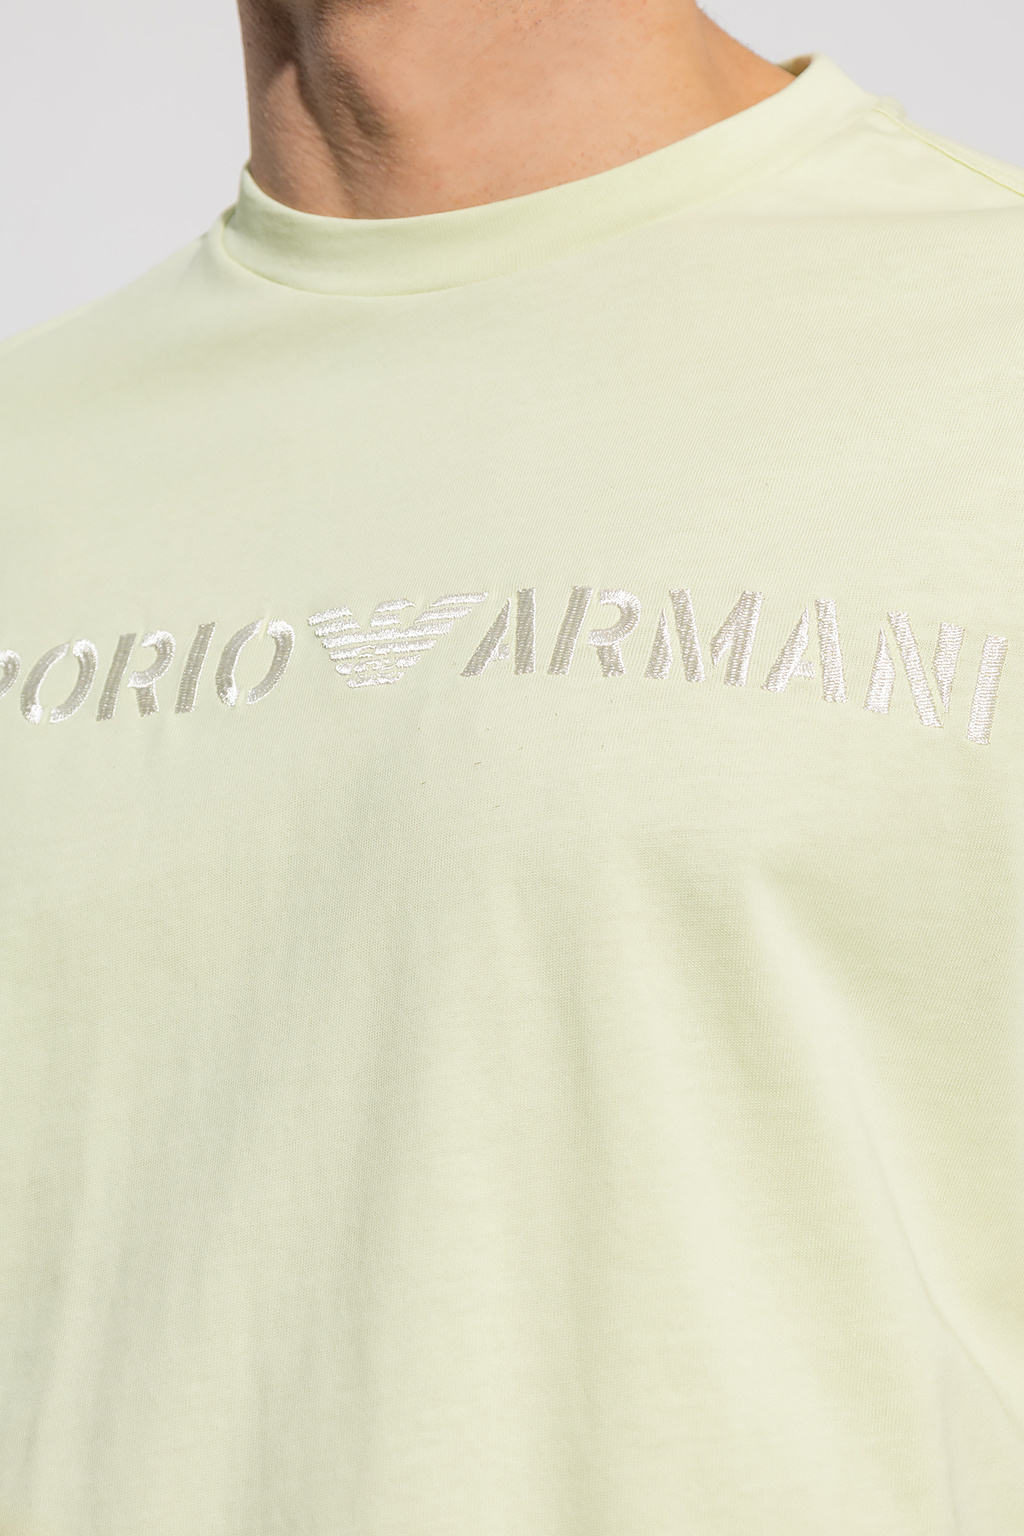 Emporio and armani T-shirt with logo